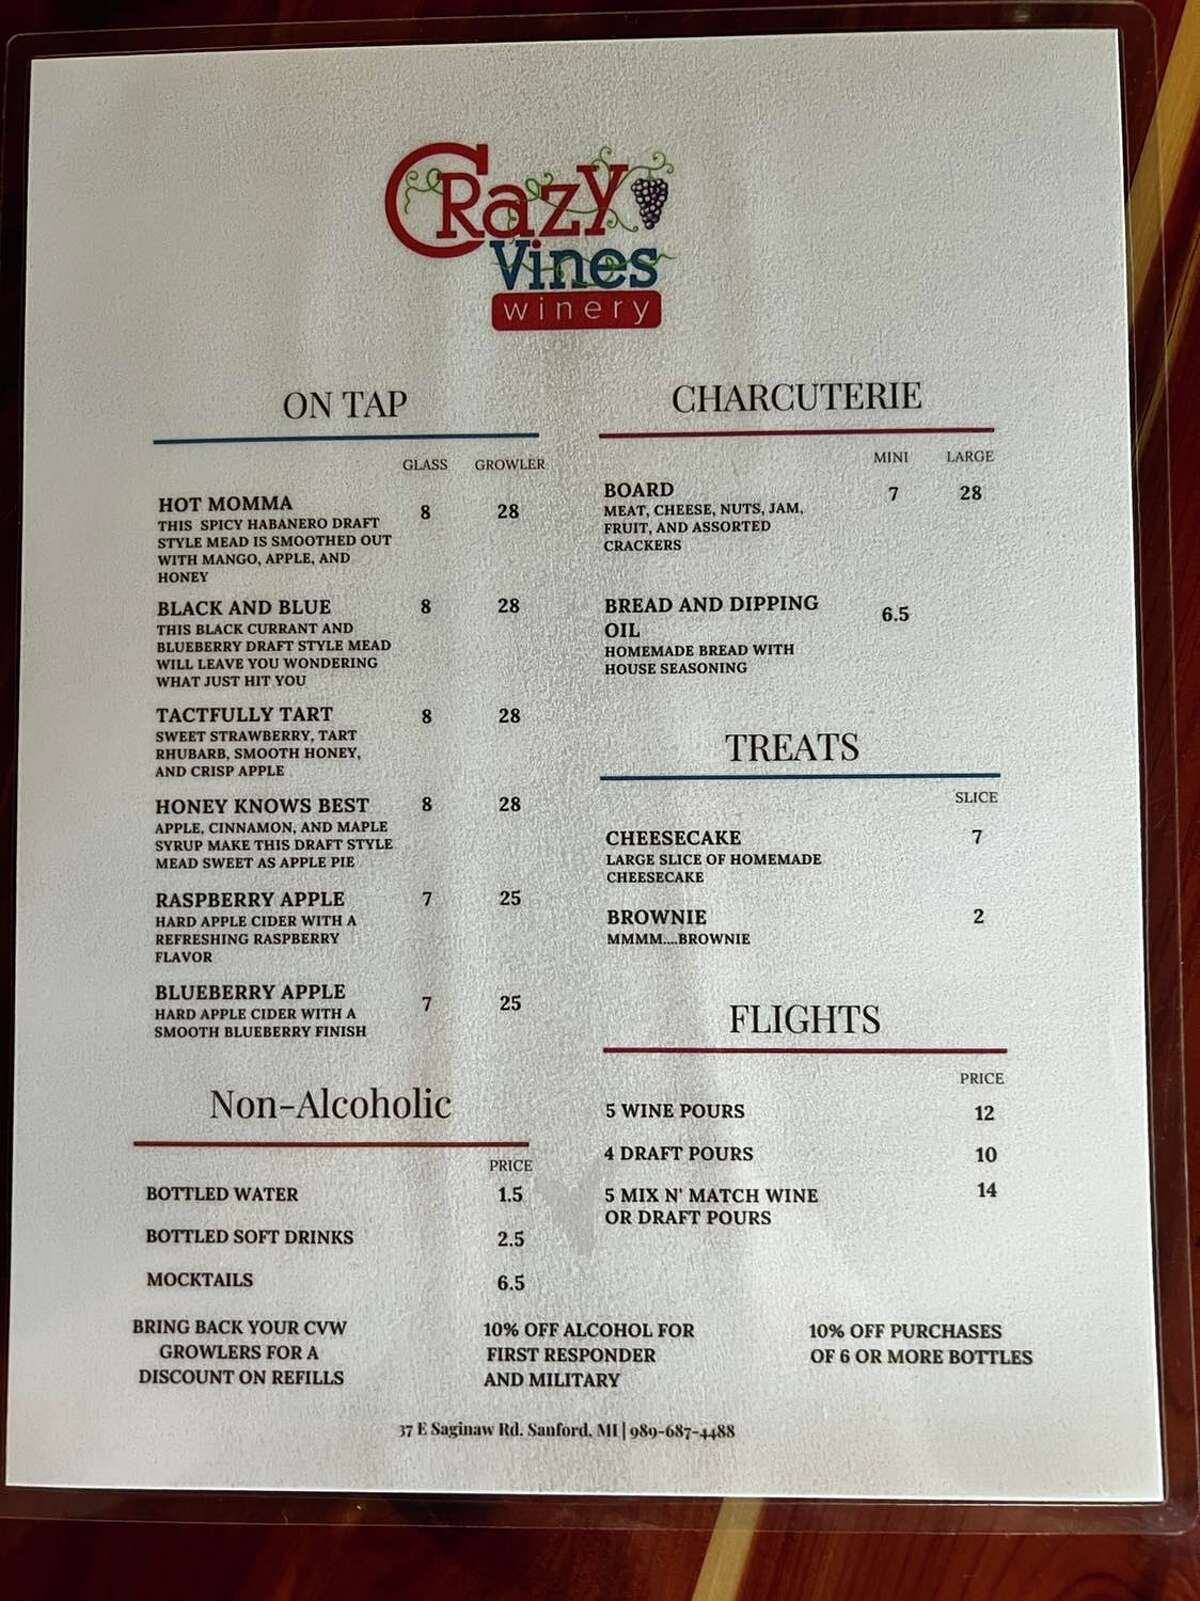 A look at the Crazy Vines Winery menu.